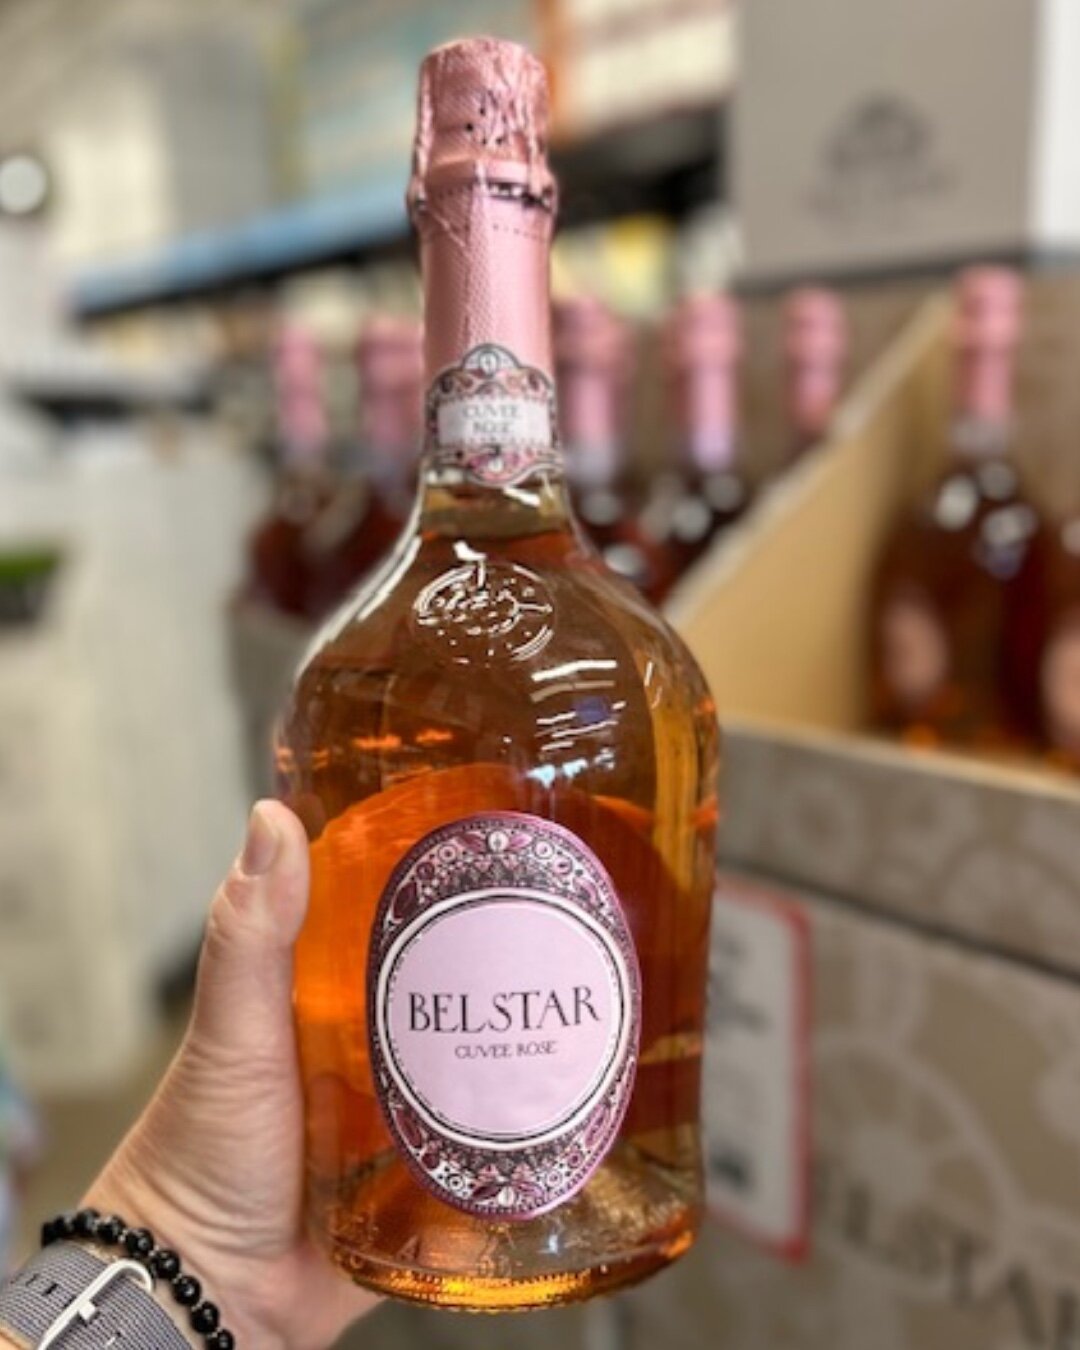 Whoever coined the term 'ros&eacute; all day' was a freaking genius 🍷. Today we'll be sipping on Belstar Sparkling Cuvee Ros&eacute;. A unique and tasty sparkler that's fresh,  juicy + somewhat sweet, it's filled with notes of citrus, licorice, melo